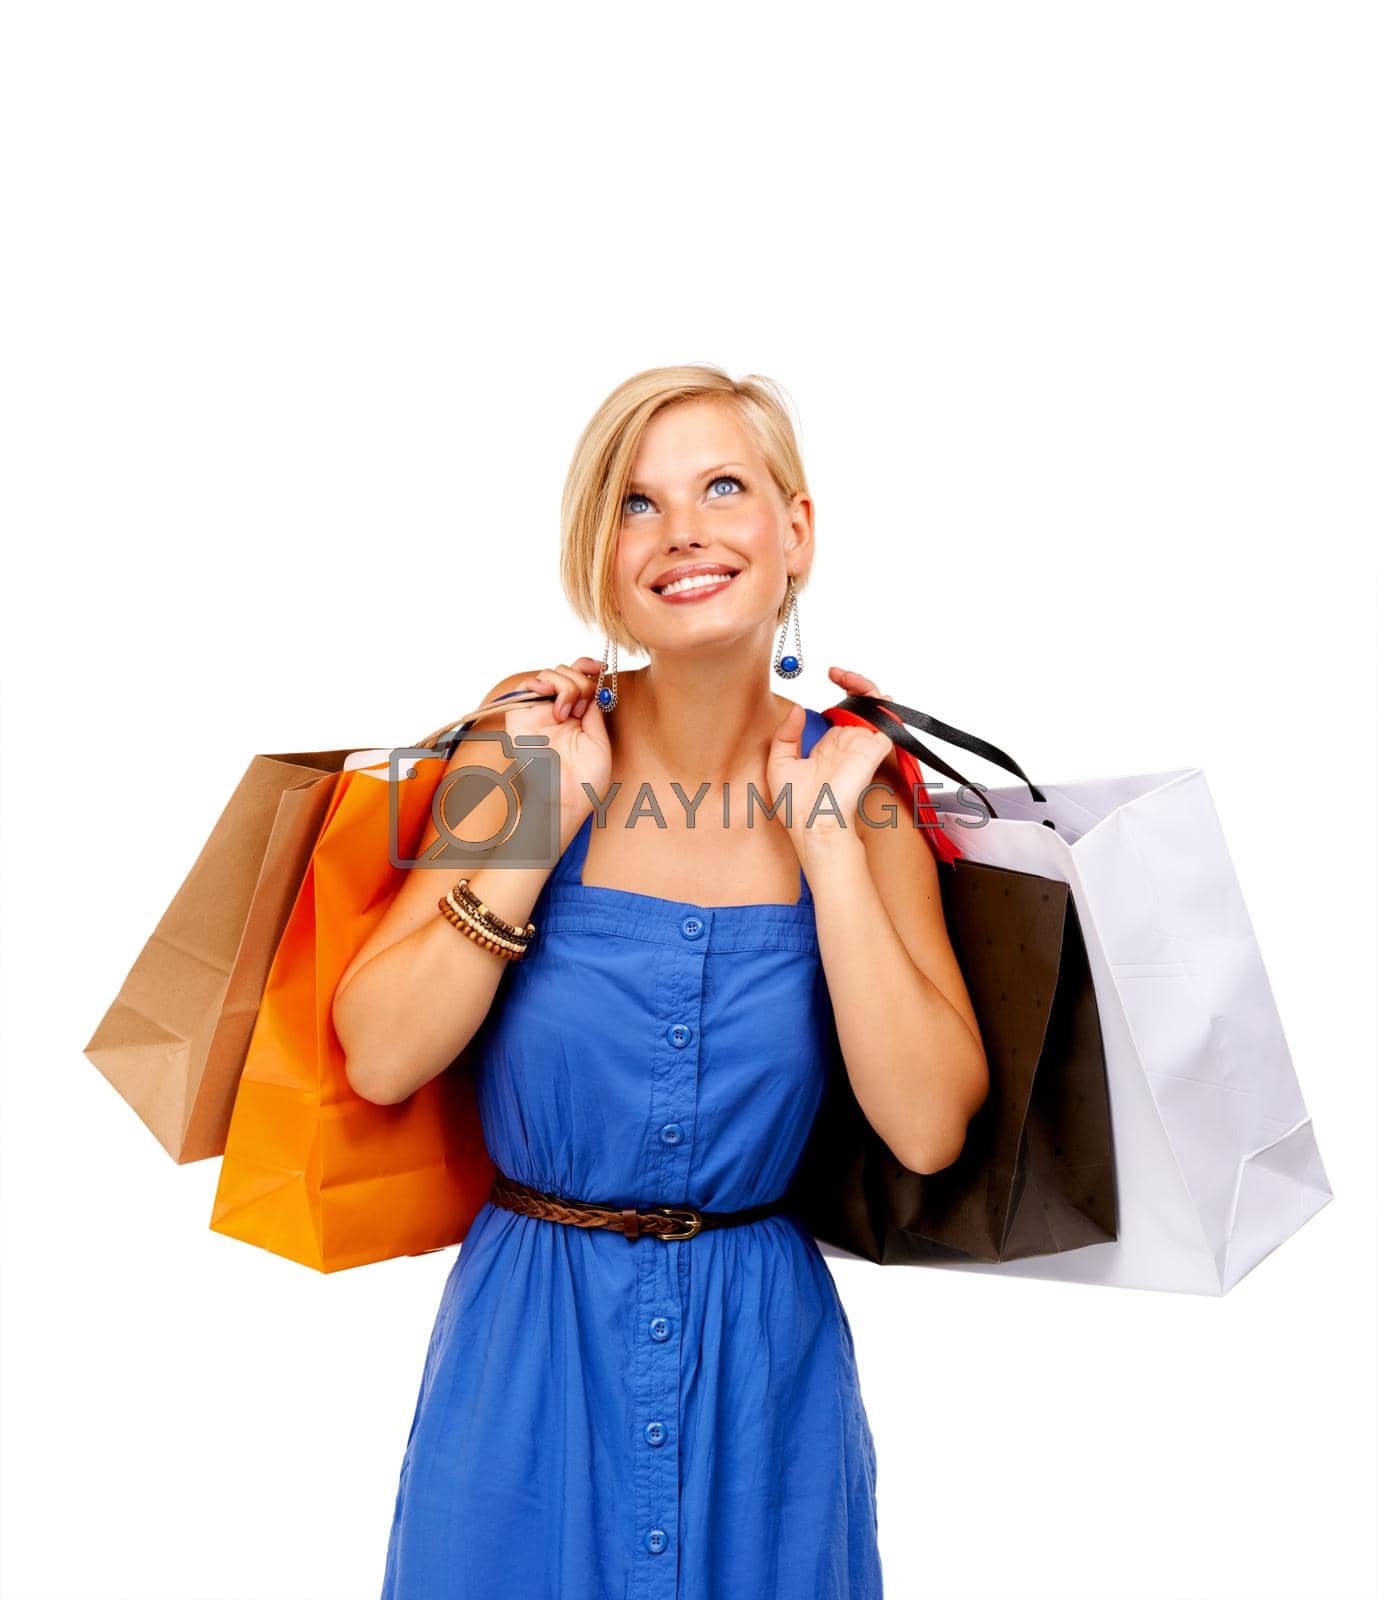 Royalty free image of So many sales, so little time. An attractive young woman holding a bunch of shopping bags. by YuriArcurs